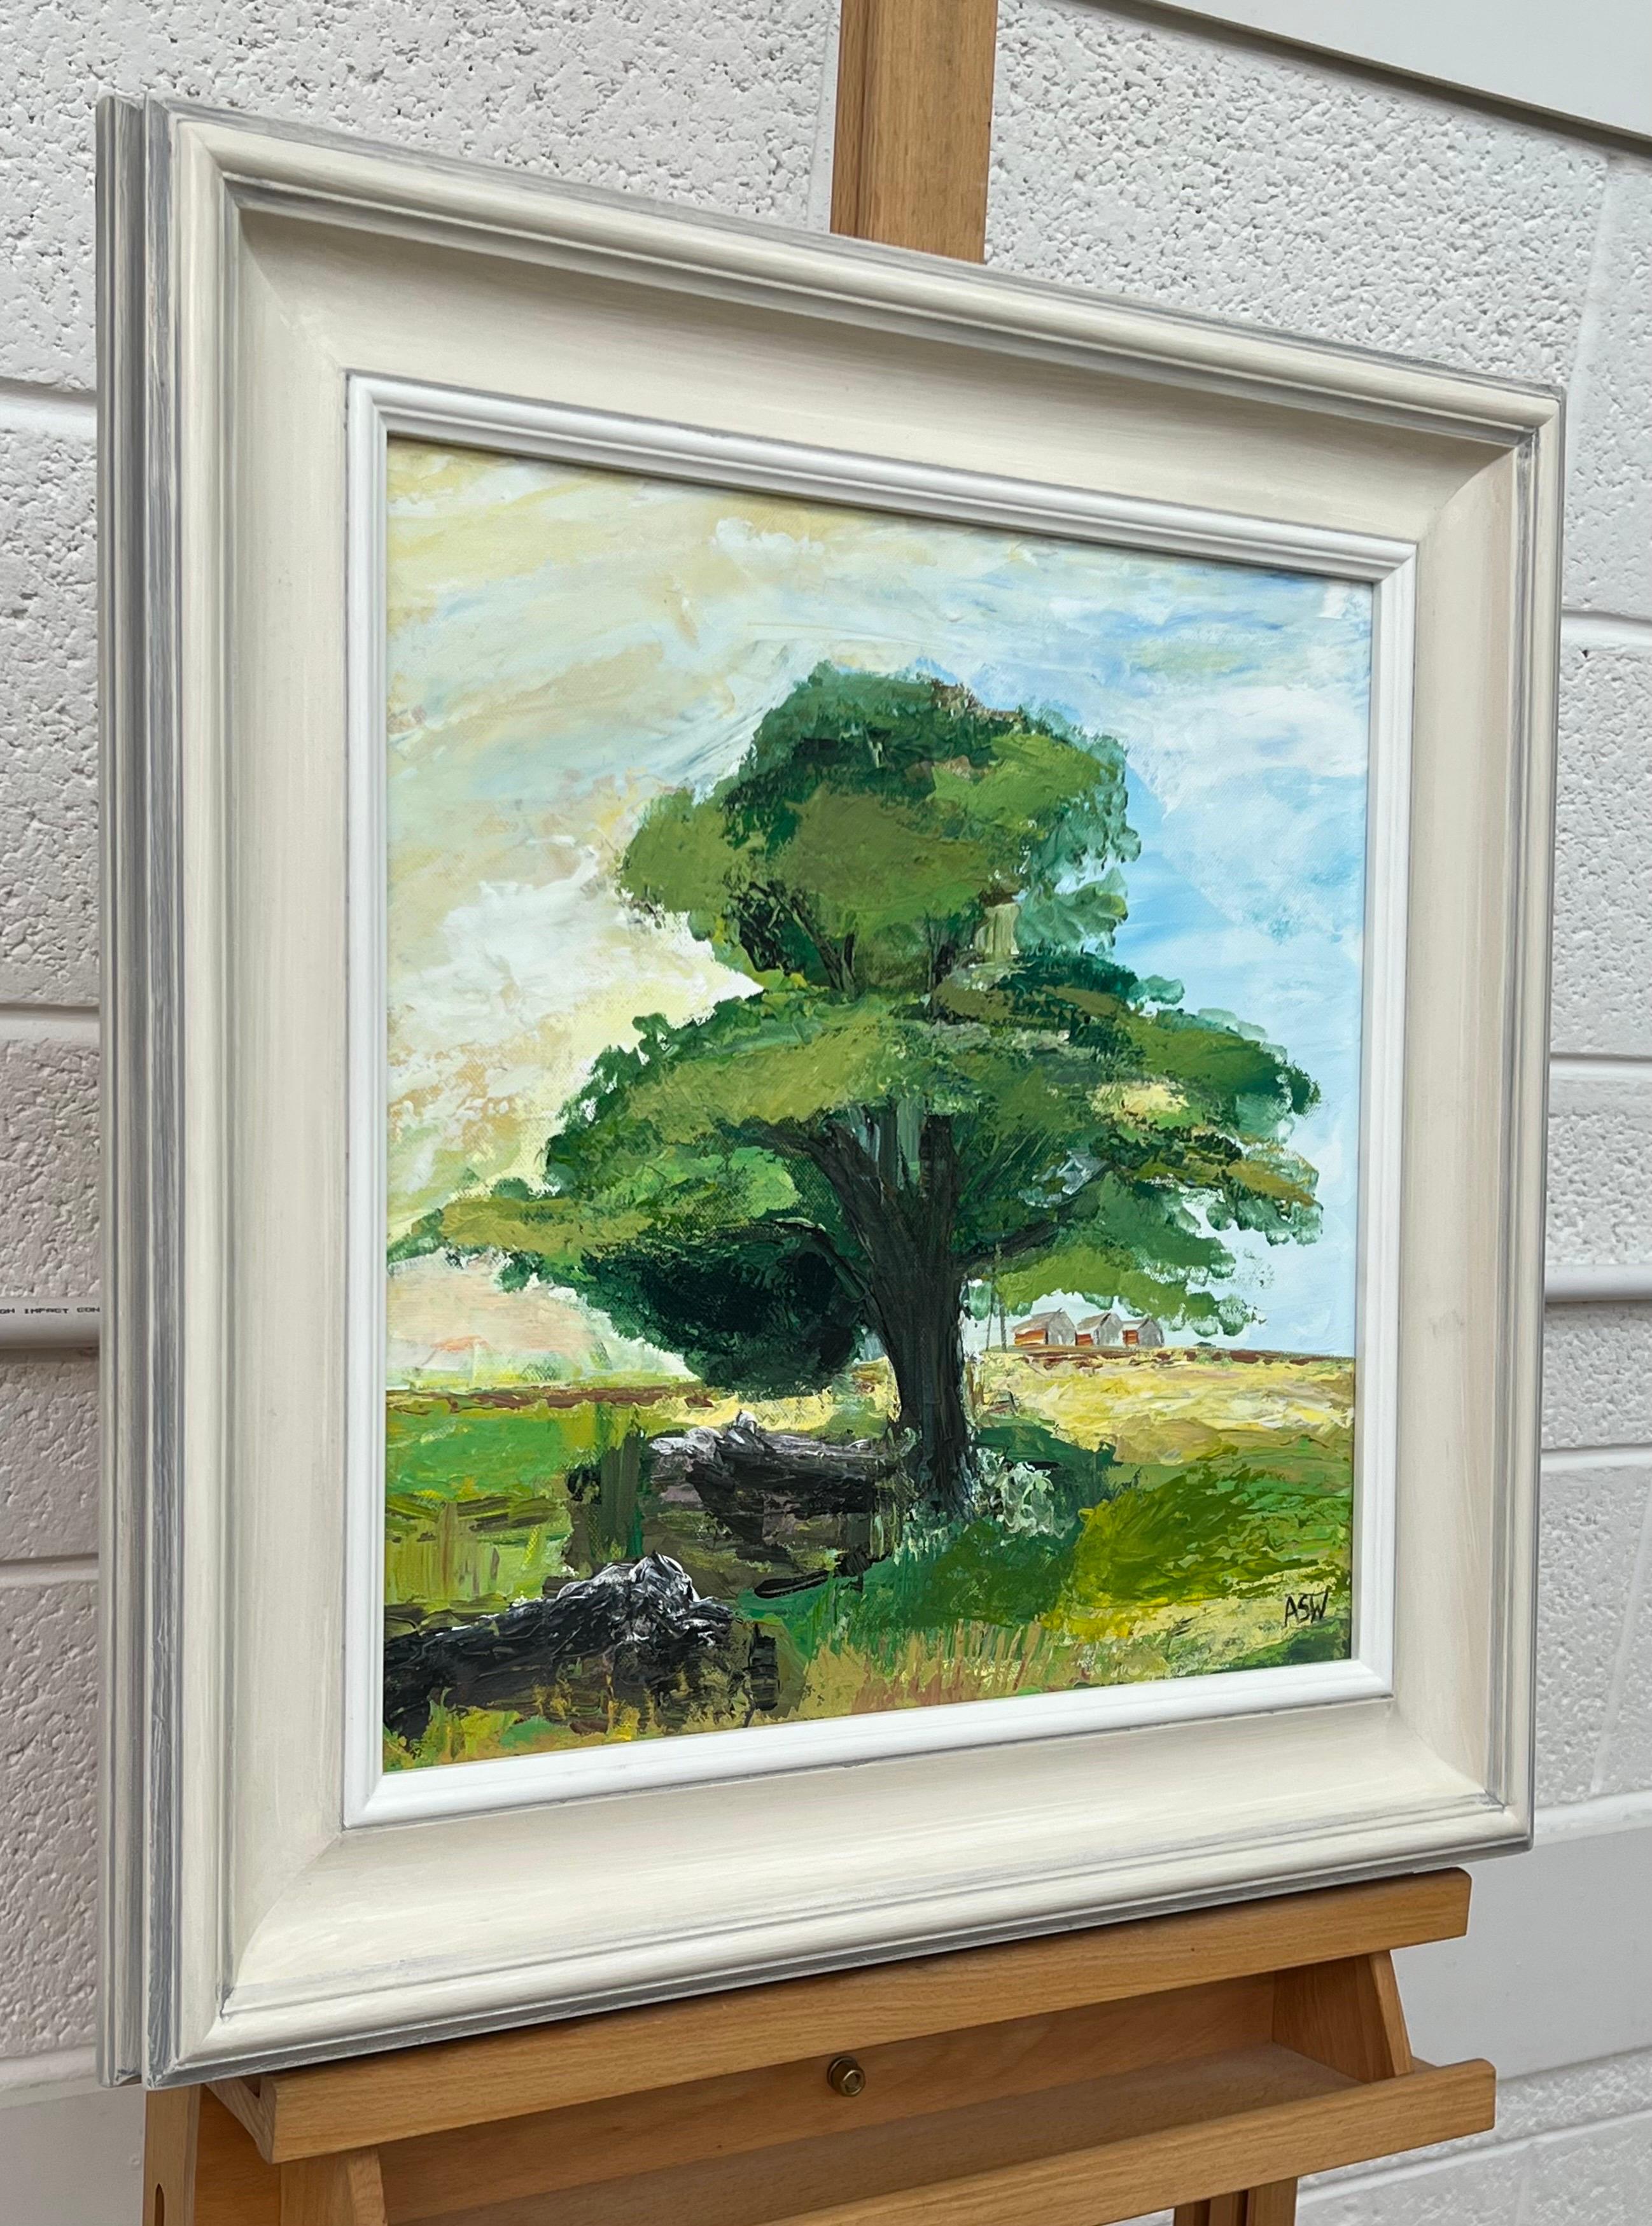 Expressive Impressionistic Impasto Painting of an Oak Tree in the English Countryside by Contemporary British Artist, Angela Wakefield. Framed in the highest quality hand-finished contemporary off-white moulding. 

Art measures 16 x 16 inches
Frame